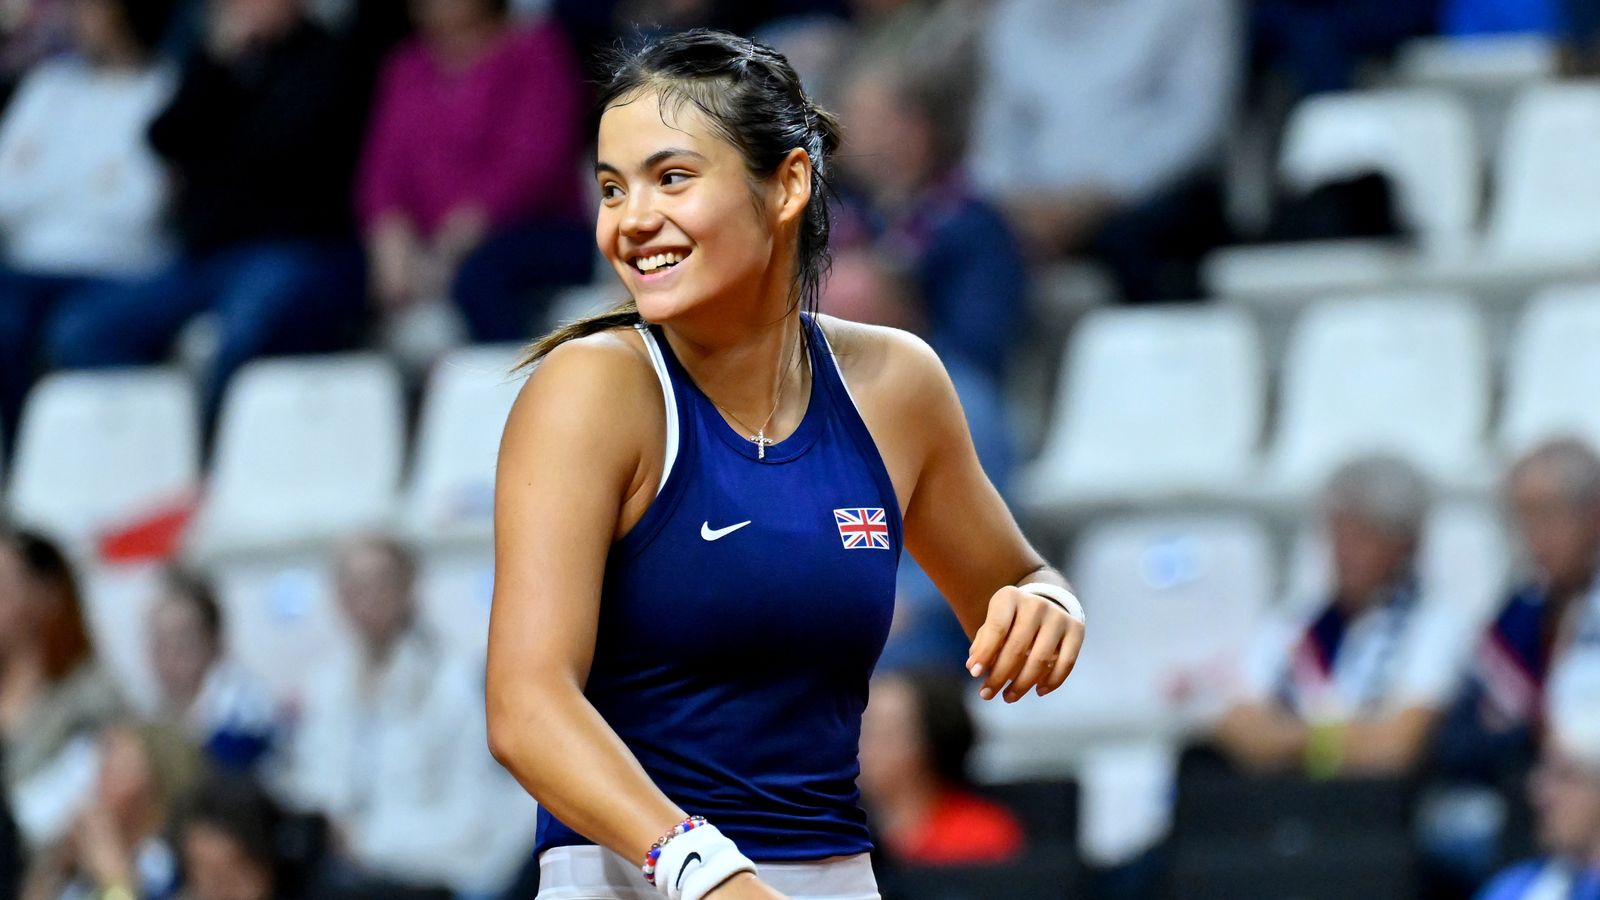 Emma Raducanu: Former US Open champion says she is playing the best tennis of her life